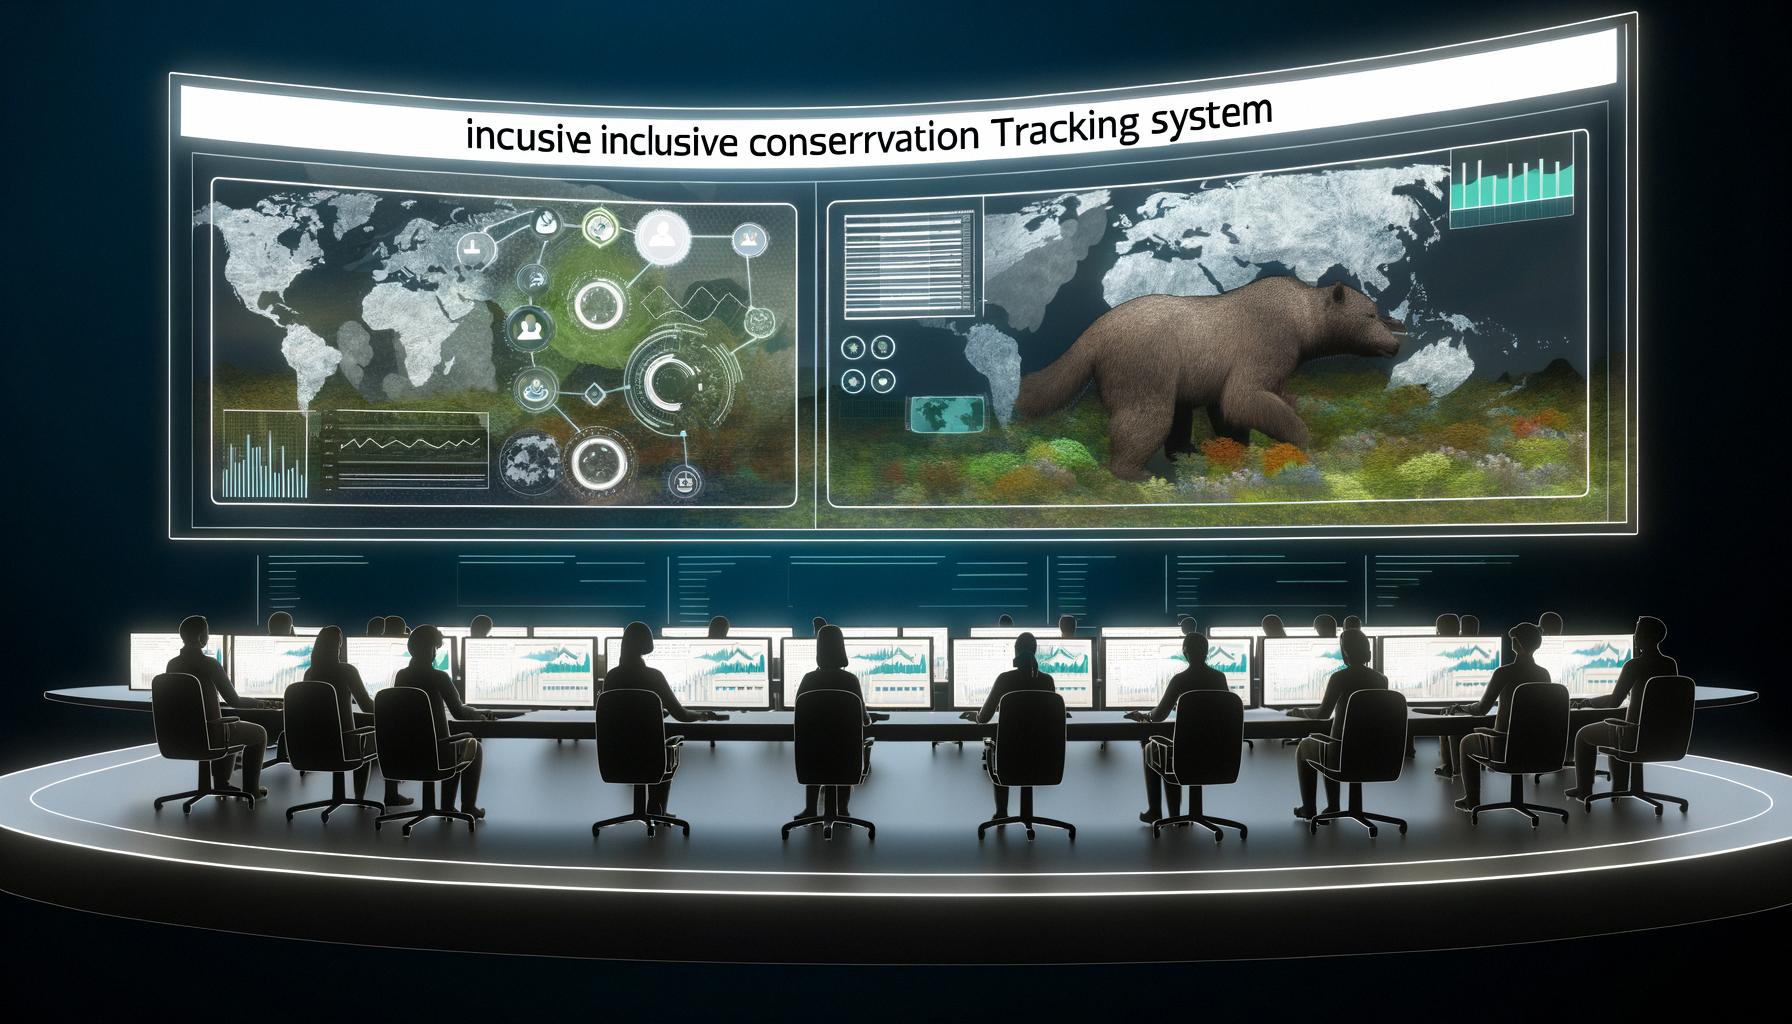 New inclusive conservation tracking system developed Balanced News